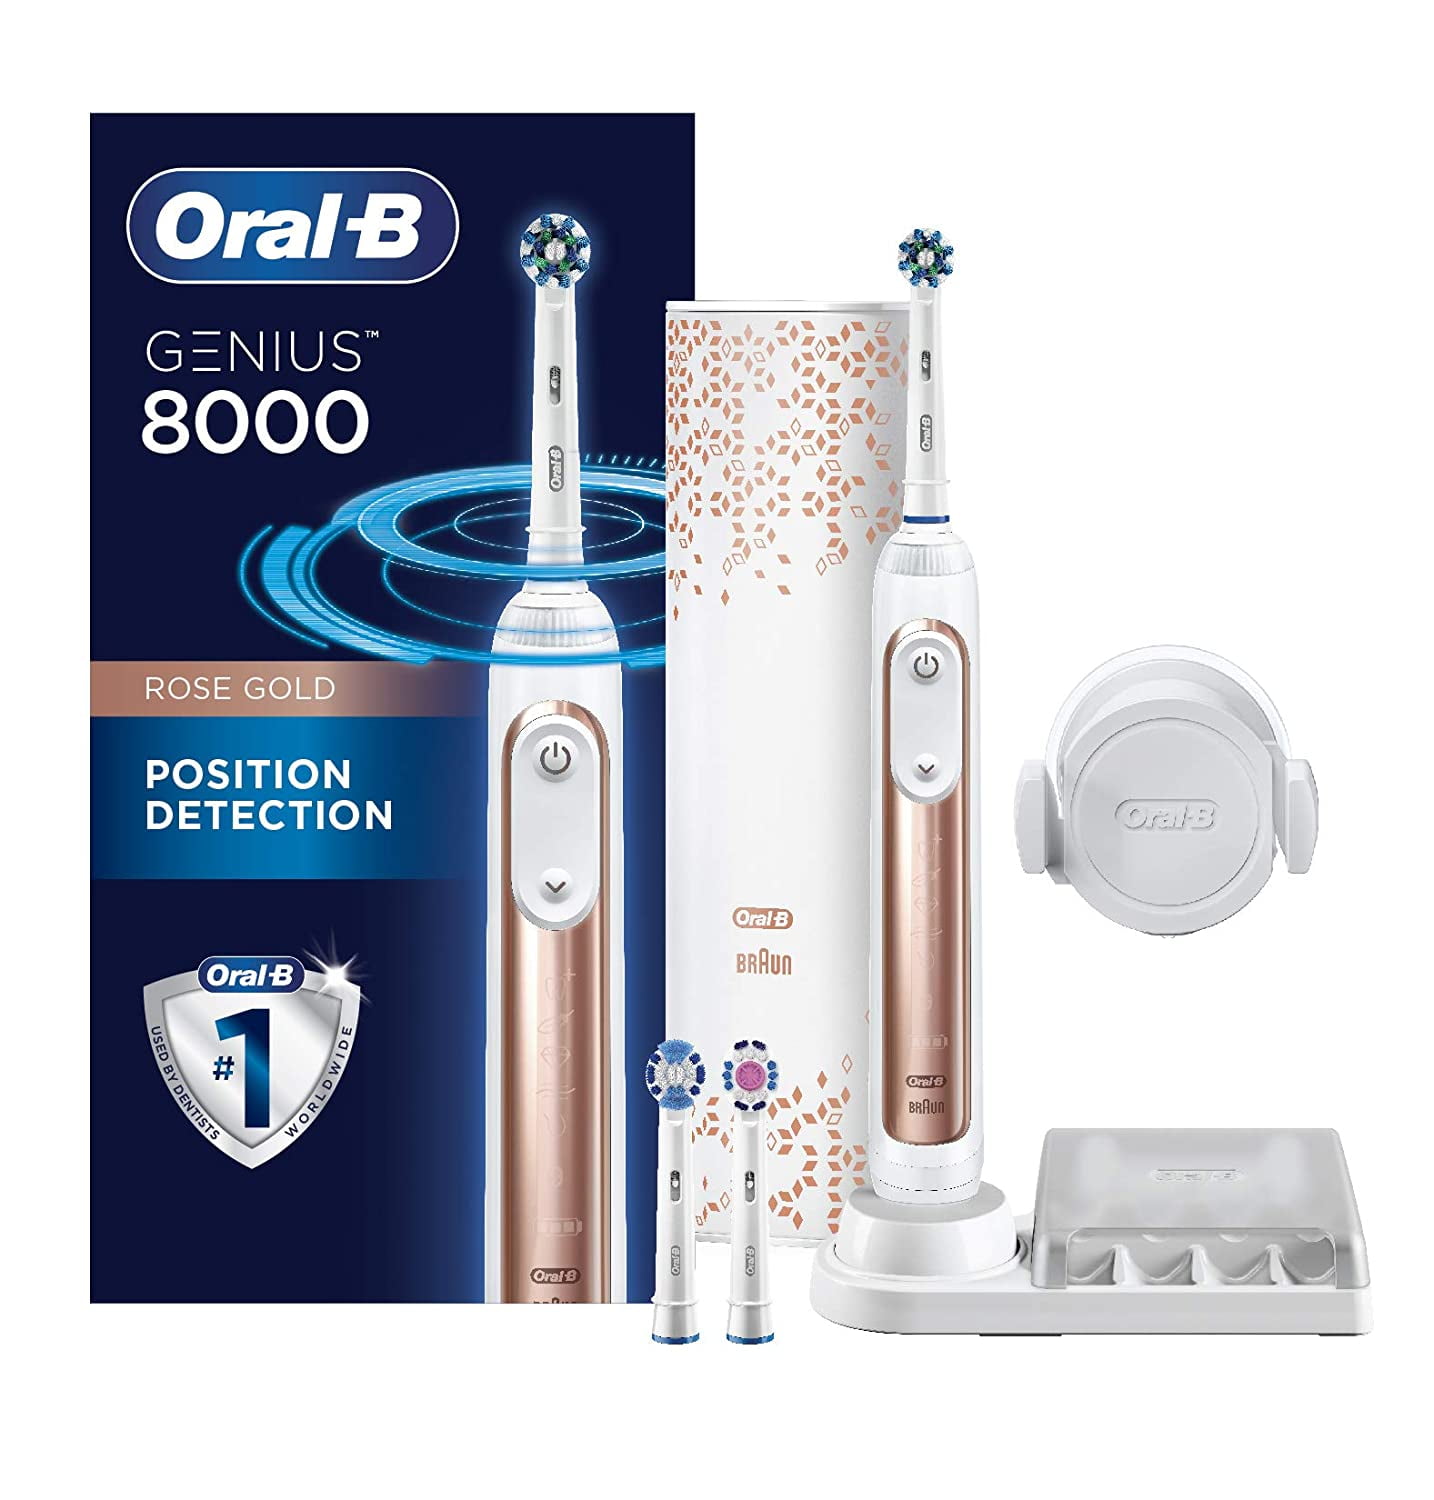 motor verdamping de wind is sterk Oral-B Genius Pro 8000 Electronic Power Rechargeable Battery Electric  Toothbrush with Bluetooth Connectivity, Rose Gold, Powered by Braun -  Walmart.com